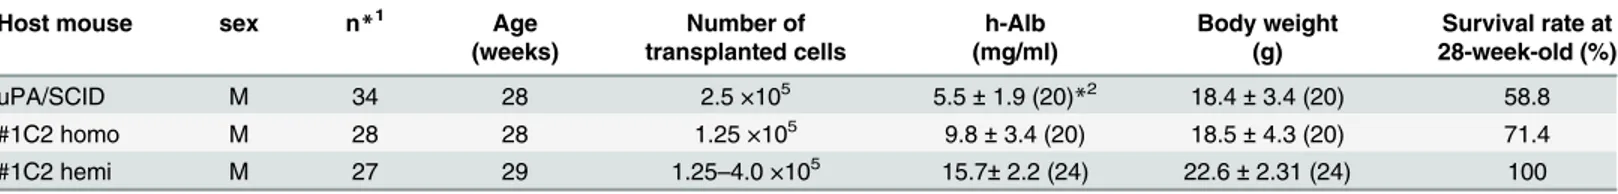 Table 2. Mouse blood h-Alb levels and body weight 28–29 weeks after birth.